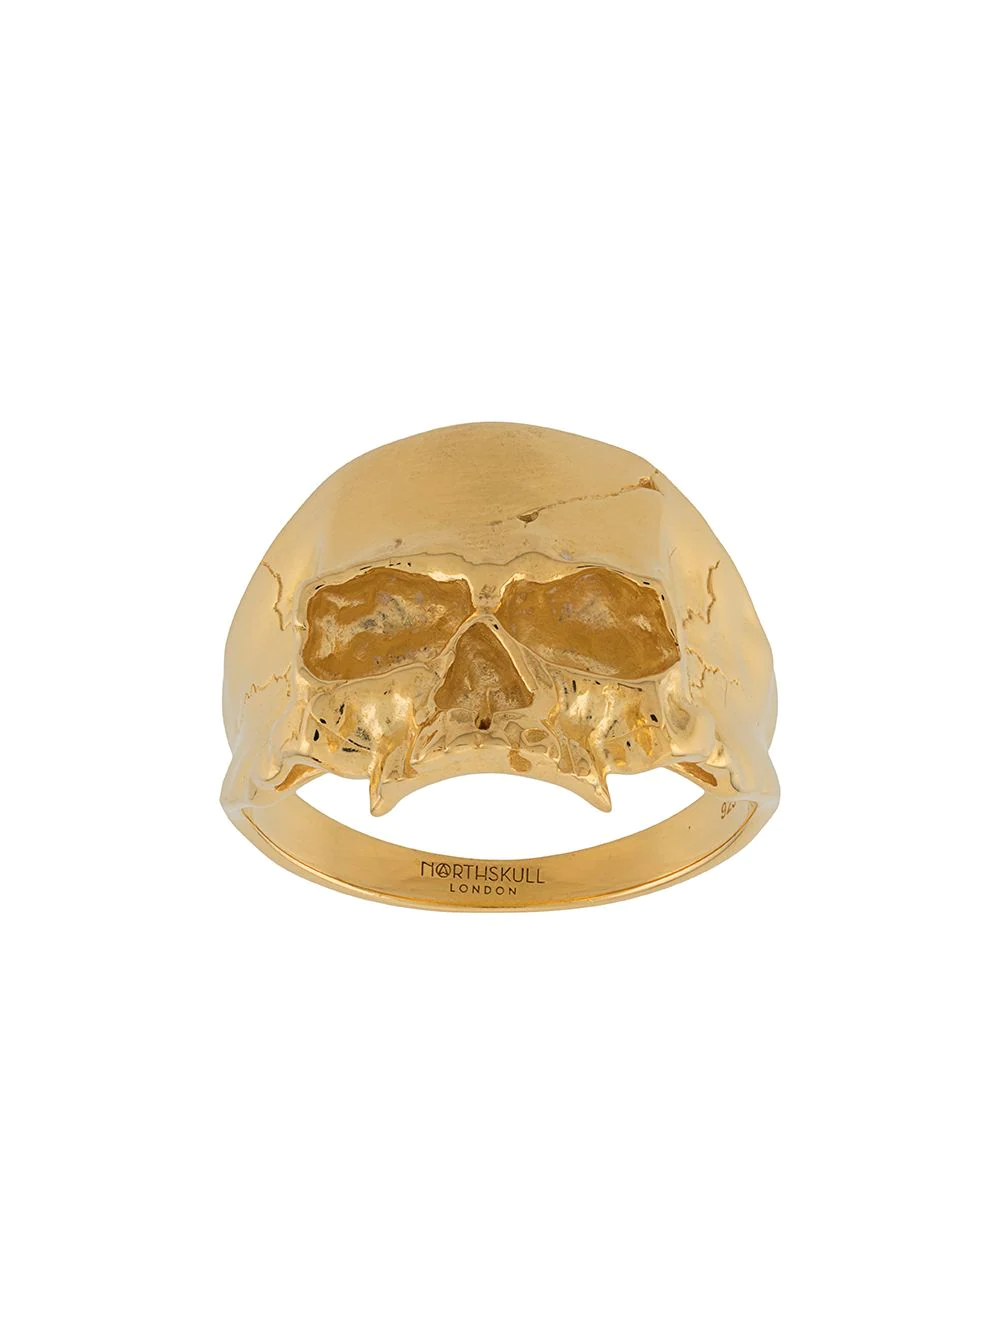 Courts and Hackett - Makers of the Keith Richards skull ring